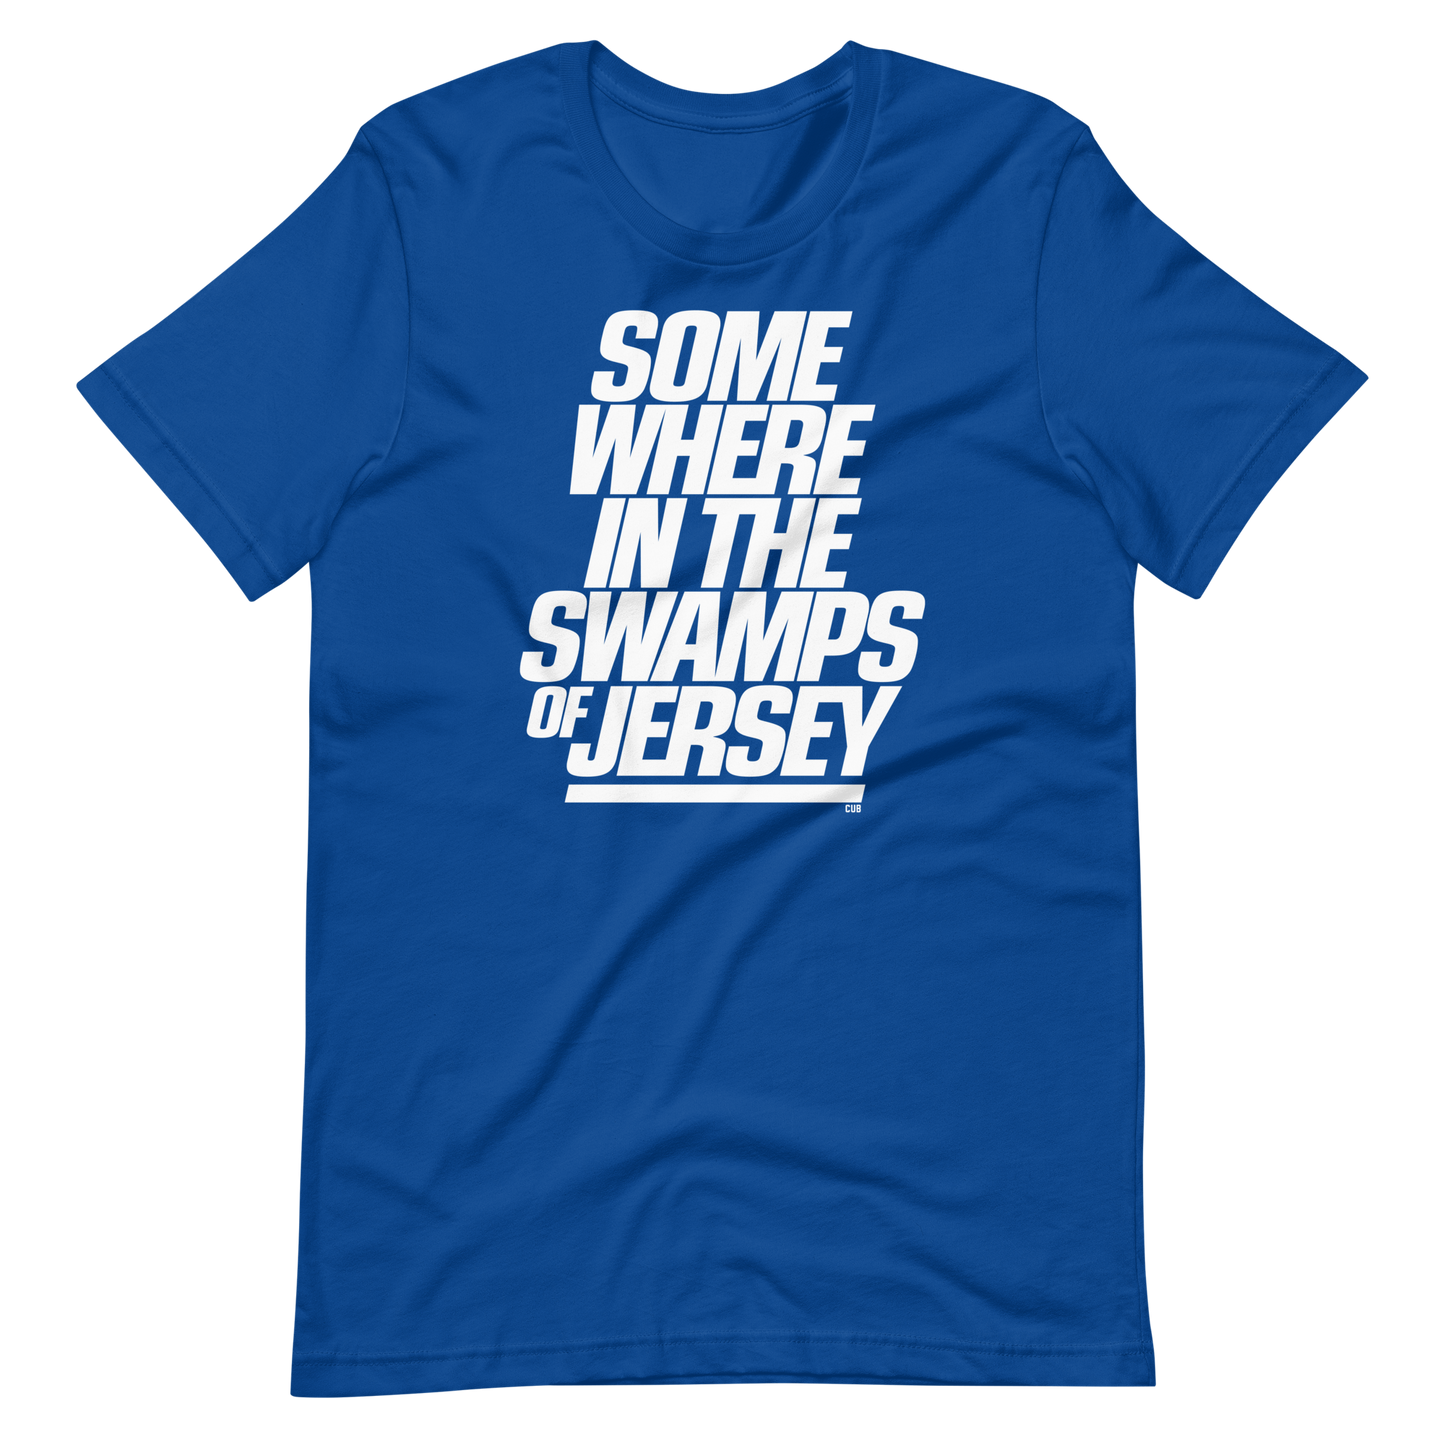 Swamps of Jersey (NYG) T-Shirt